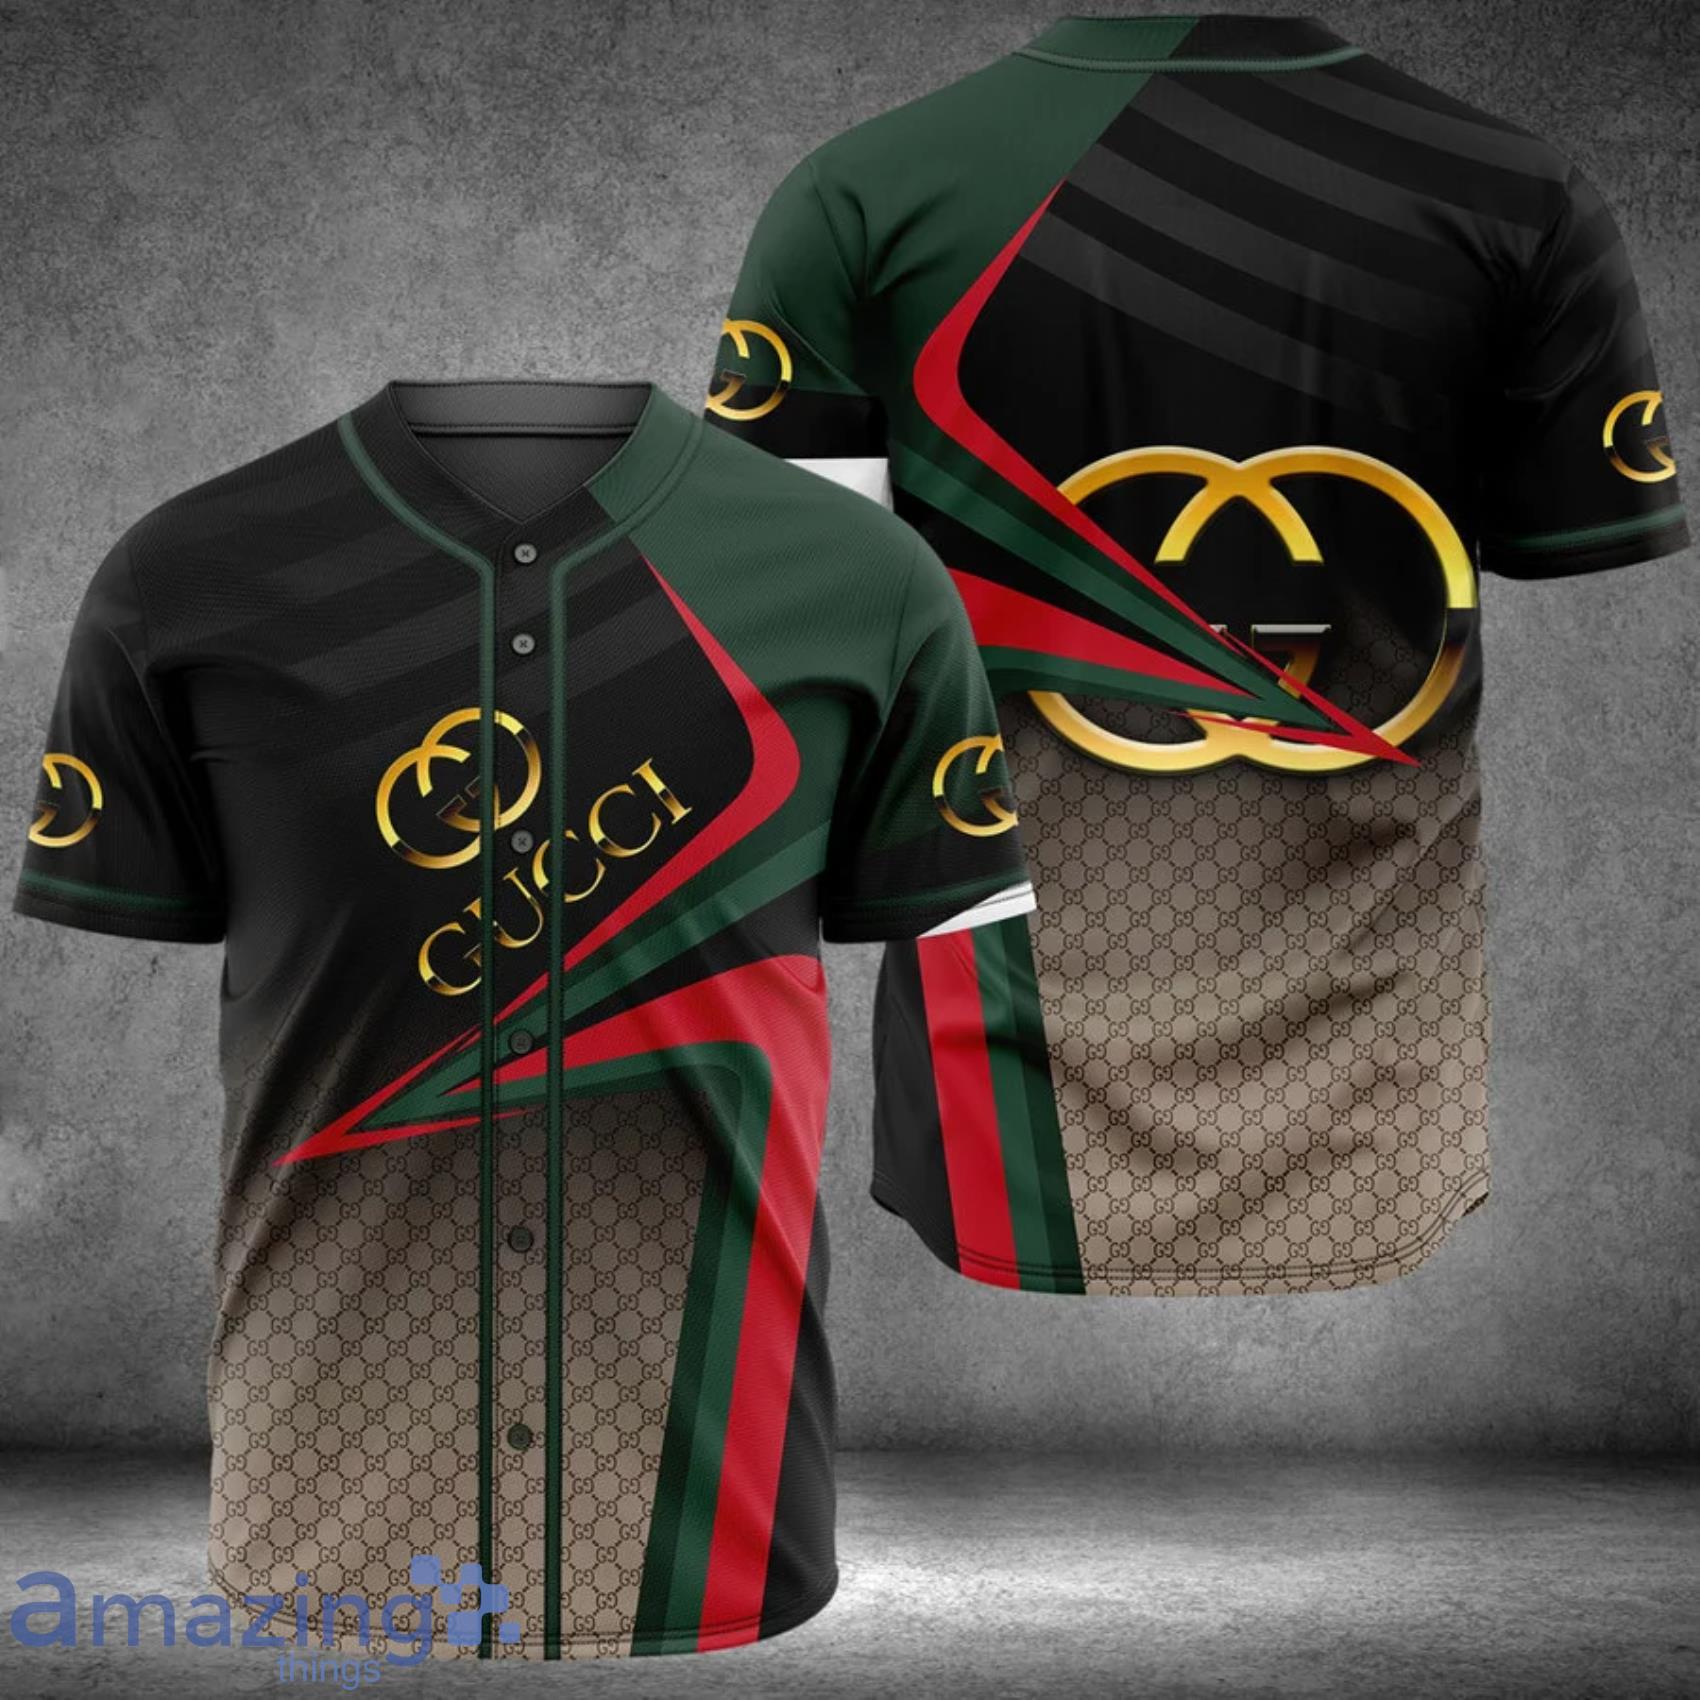 Gucci Black Style 4 Baseball Jersey Clothes Sport For Men Women